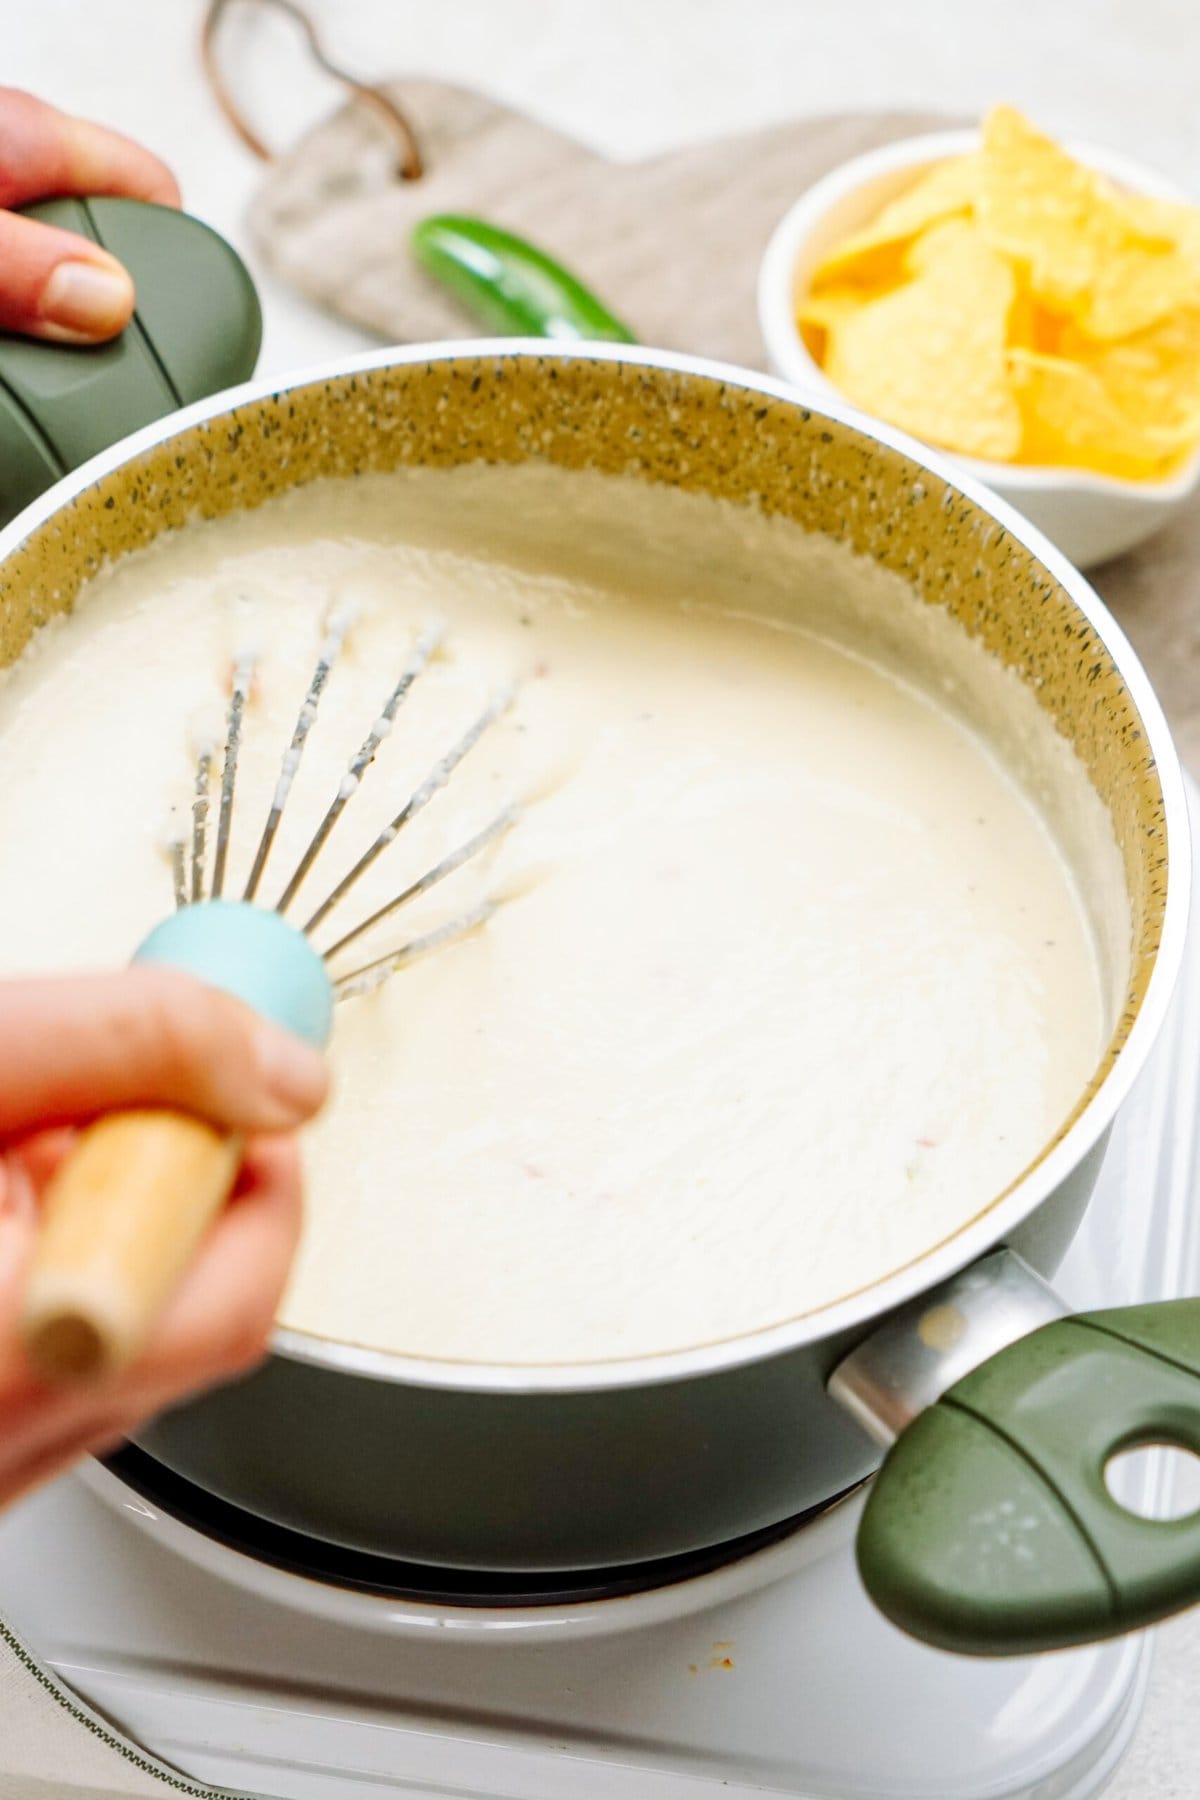 Hands are shown stirring a creamy white queso with a whisk in a green saucepan on a stove. A bowl of tortilla chips is in the background.